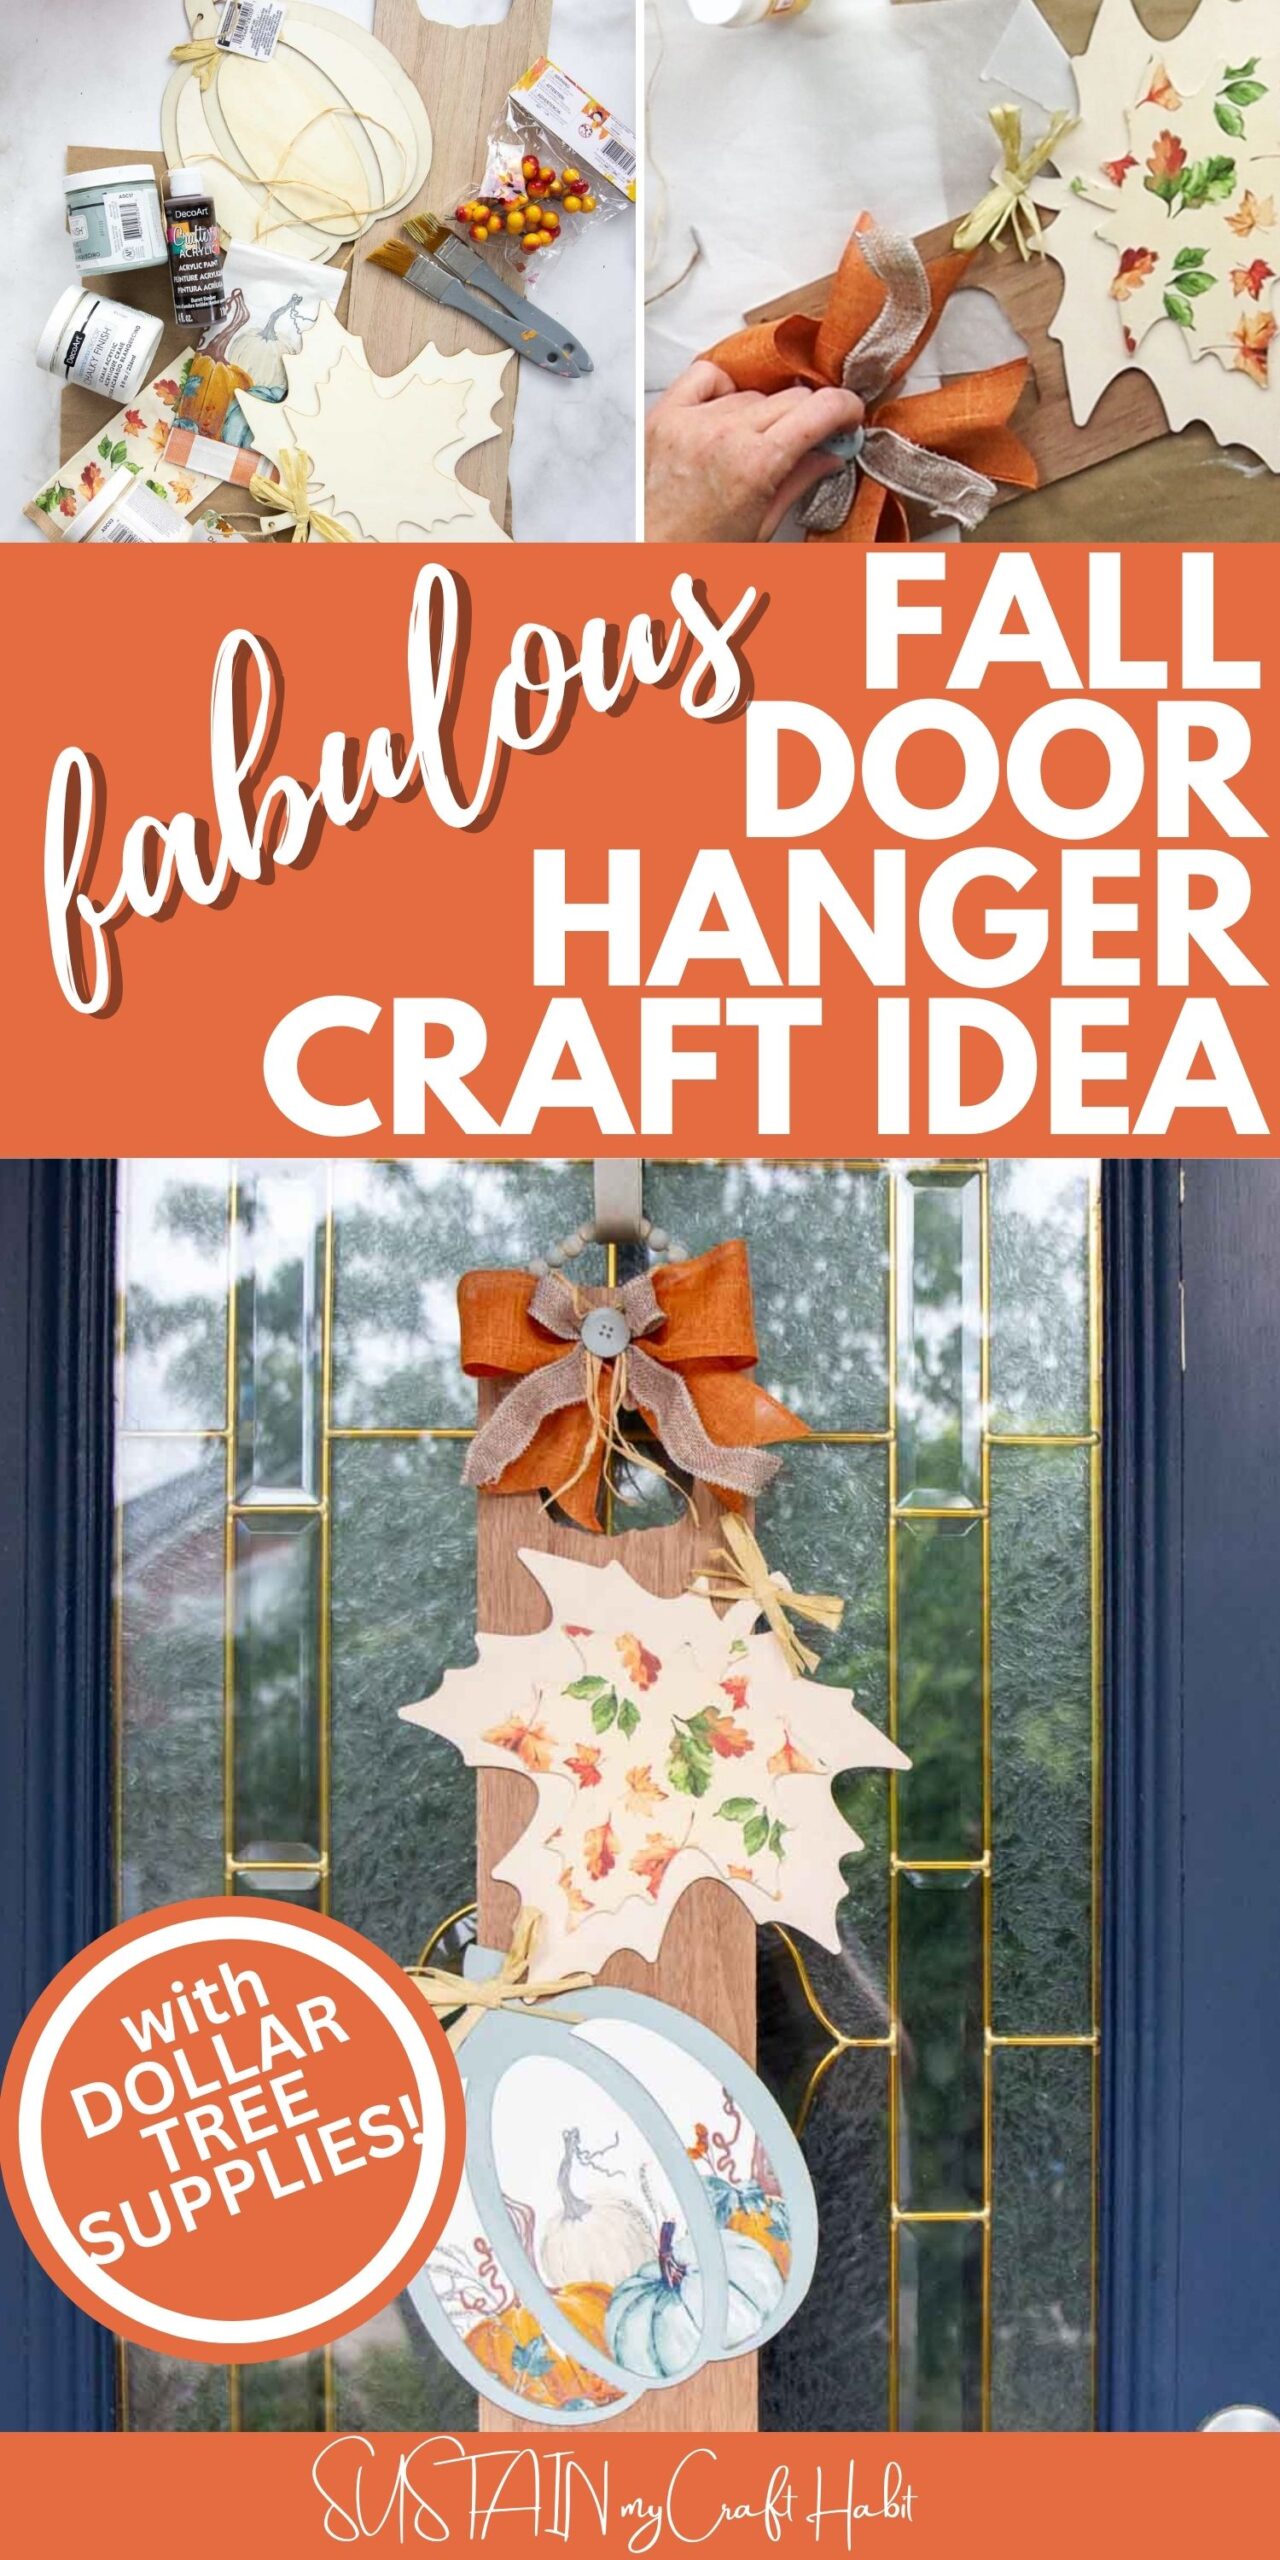 Collage showing how to make a fall door hanger, with text overlay.